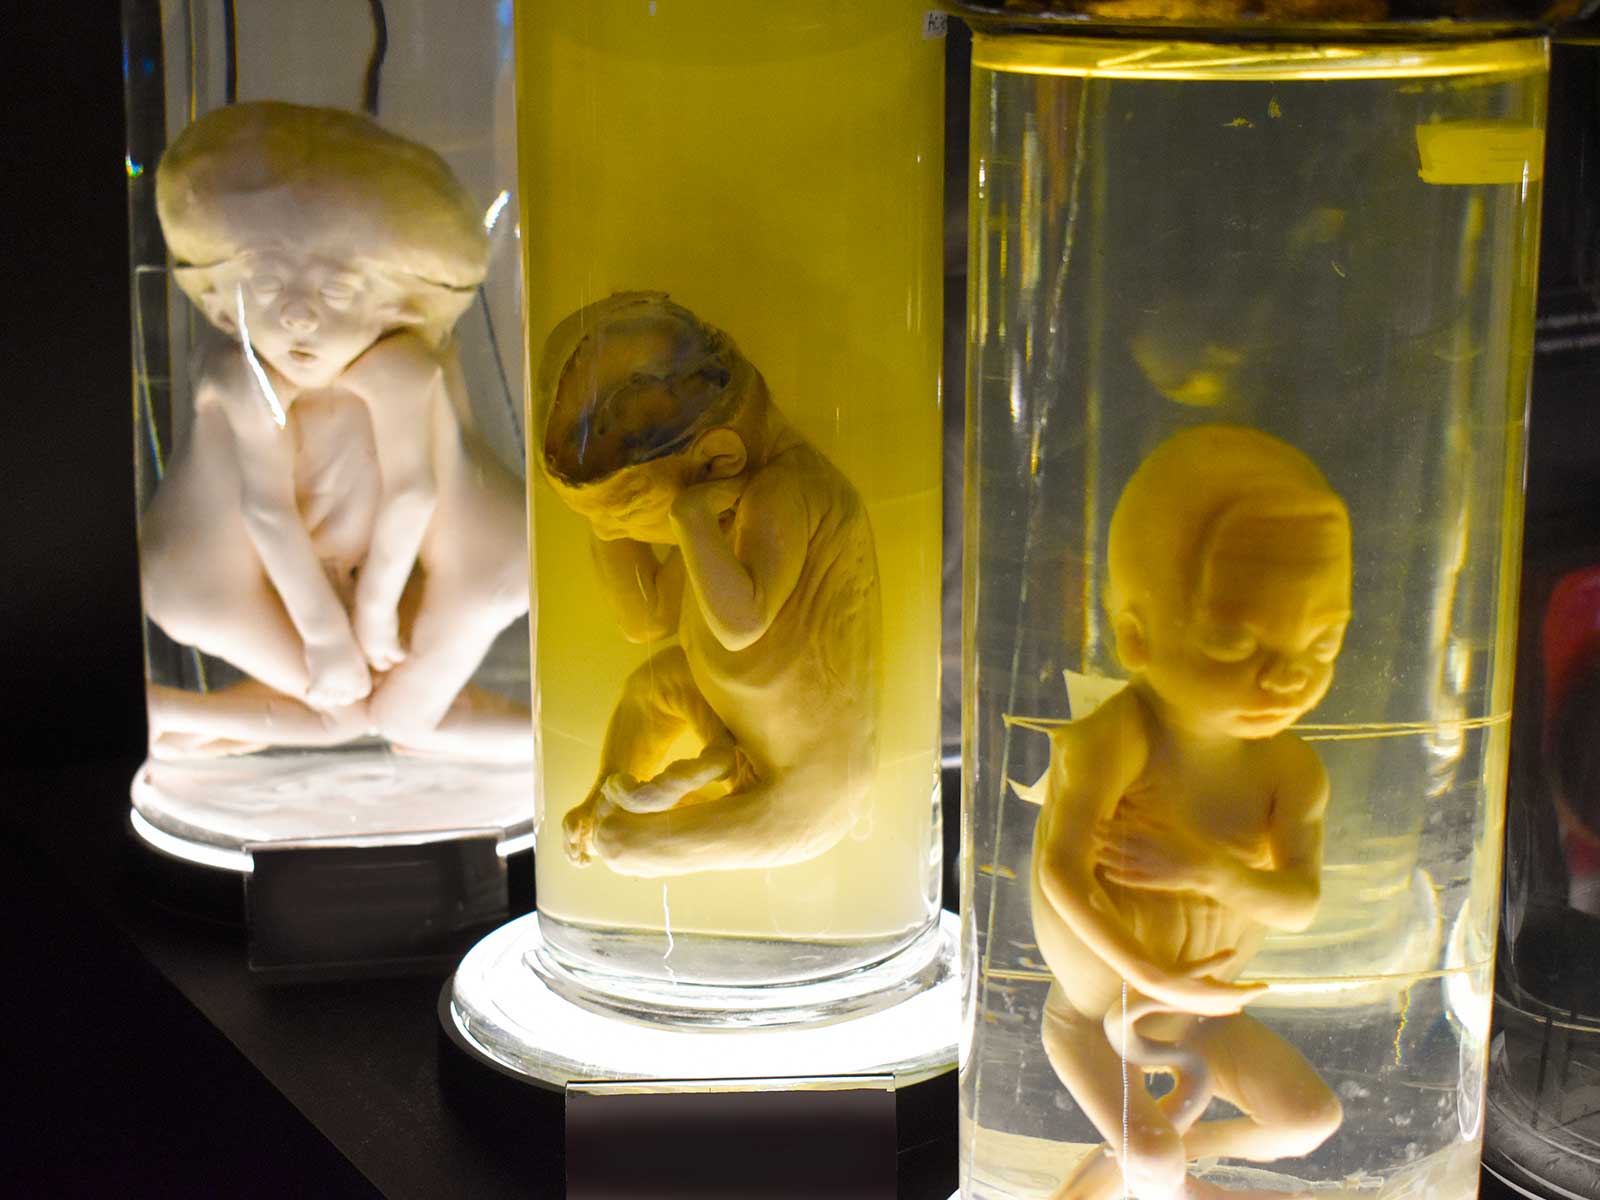 Museum of Malformations of the Human Body